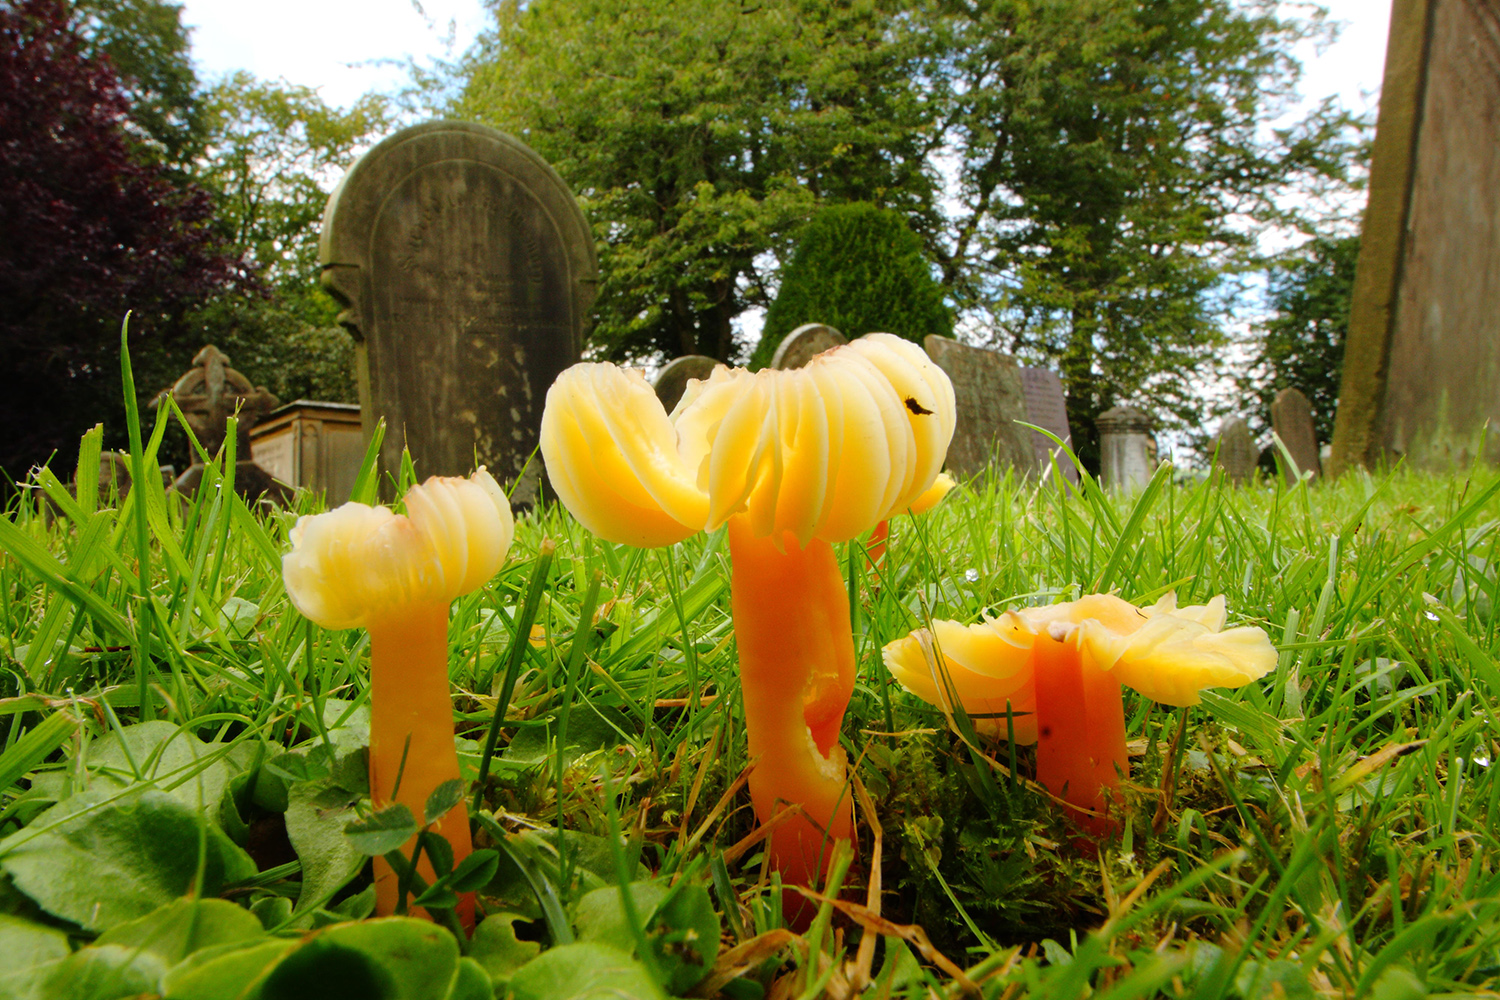 Orange umbrella-like fungi growing in grass, with grave monuments in the background.